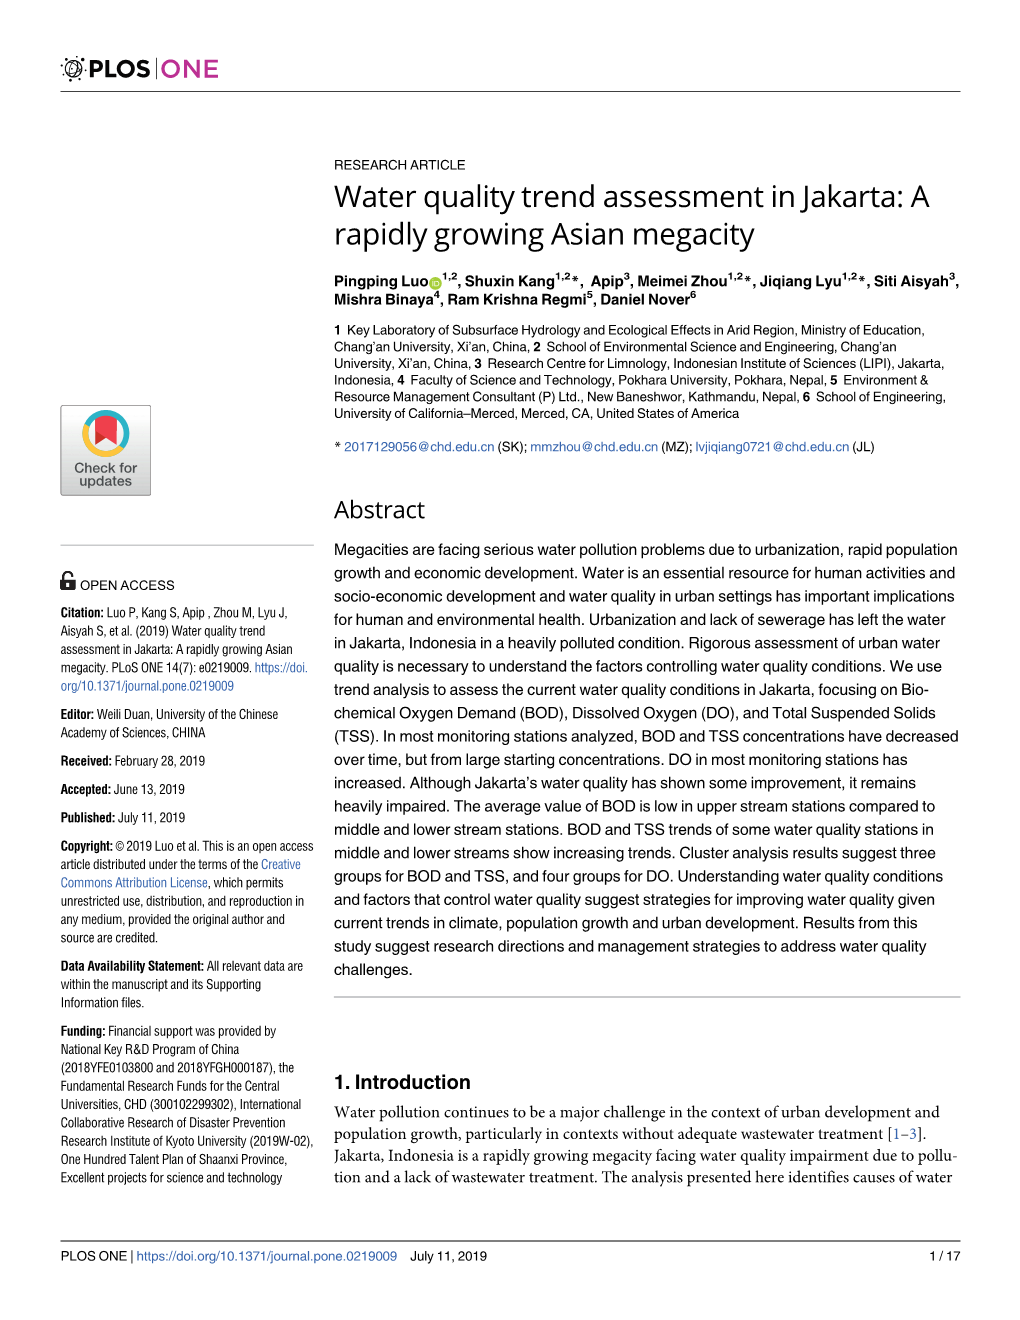 Water Quality Trend Assessment in Jakarta: a Rapidly Growing Asian Megacity